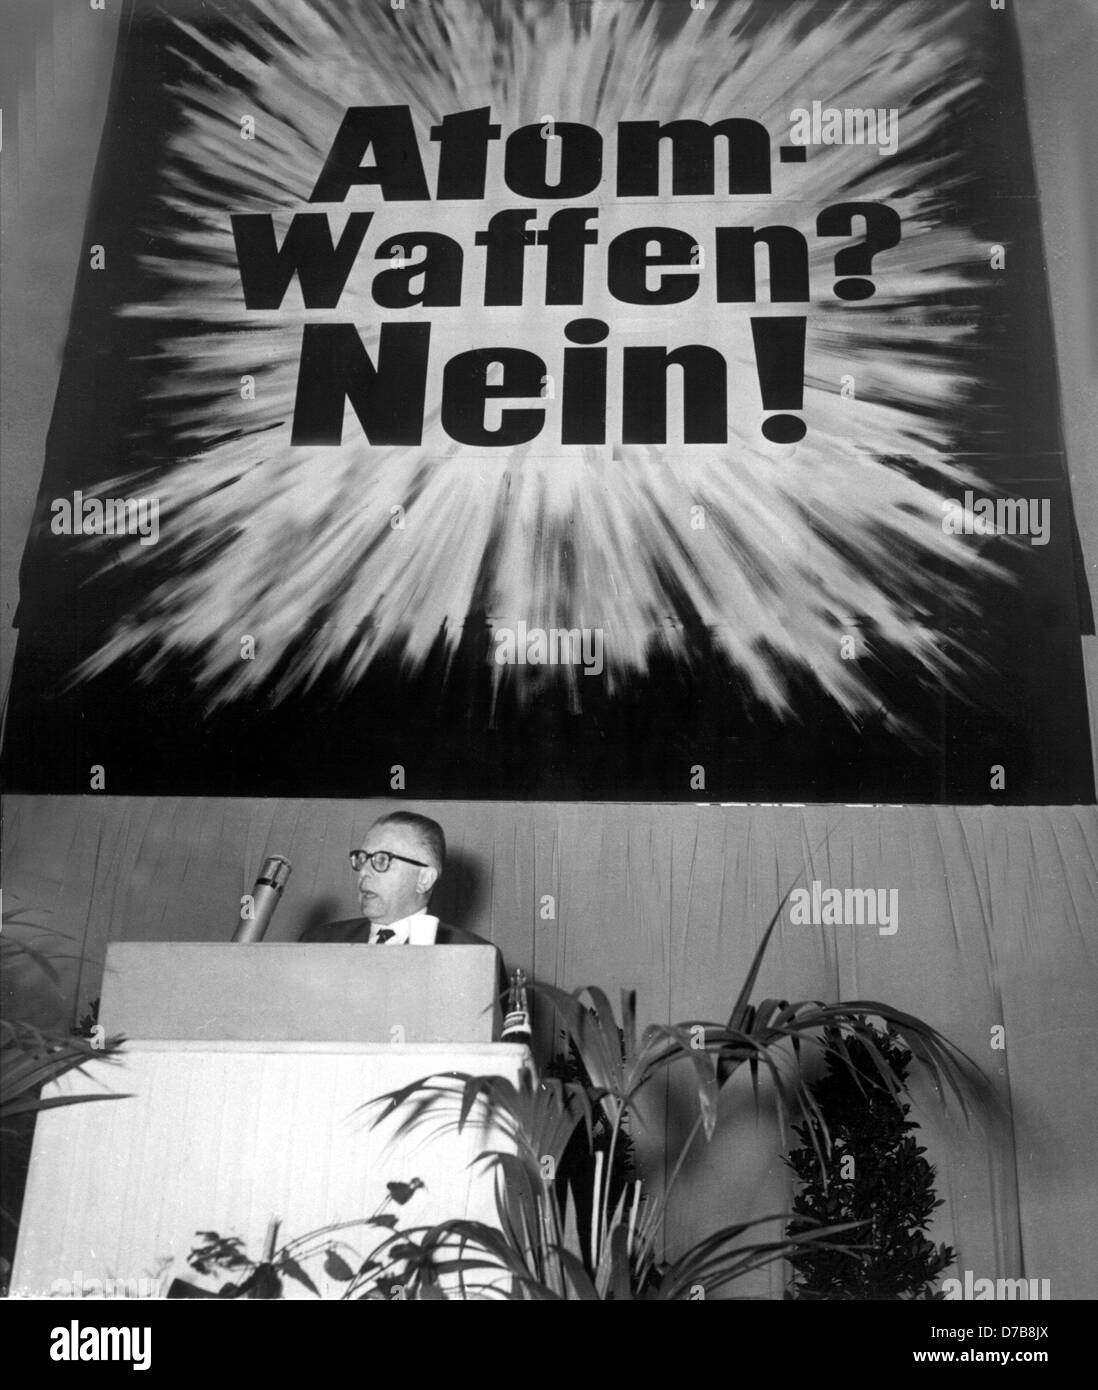 Delegate of the Bundestag Gustav Heinemann gives a speech at a rally of the SPD on the 19th of April in 1958 in Frankfurt am Main. Round 4,000 people participated in the event, which had the motto 'Nuclear armament is a deadly experiment'. Stock Photo